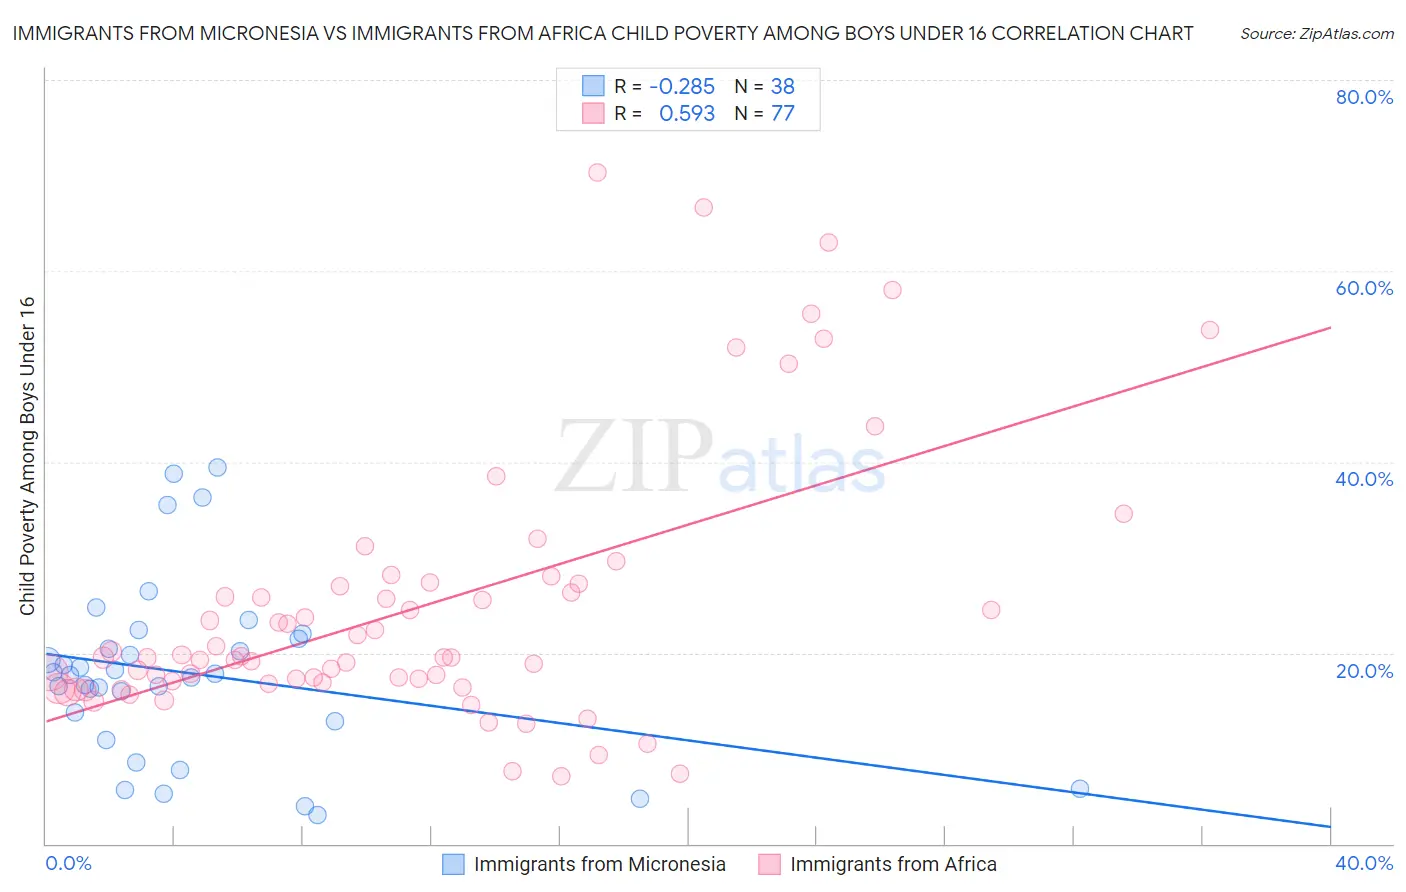 Immigrants from Micronesia vs Immigrants from Africa Child Poverty Among Boys Under 16